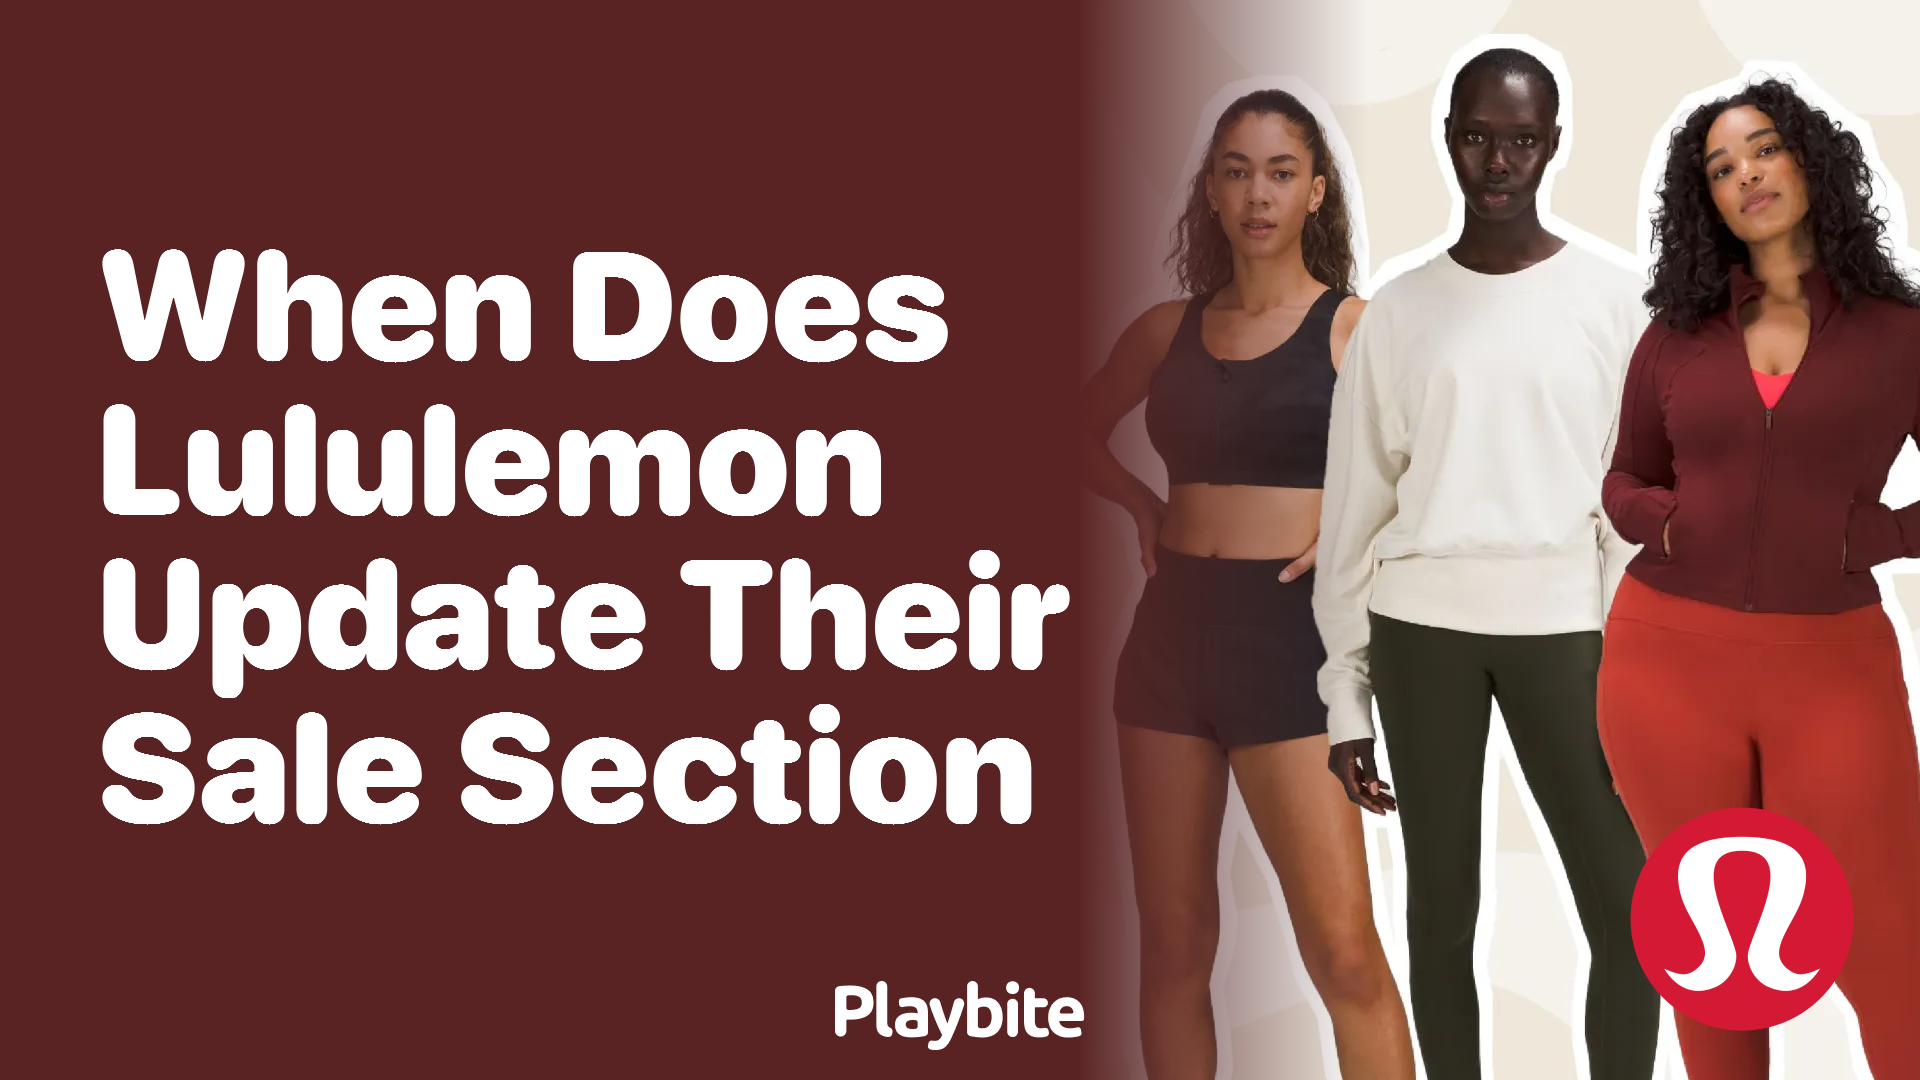 When Does Lululemon Update Their 'We Made Too Much' Section? - Playbite